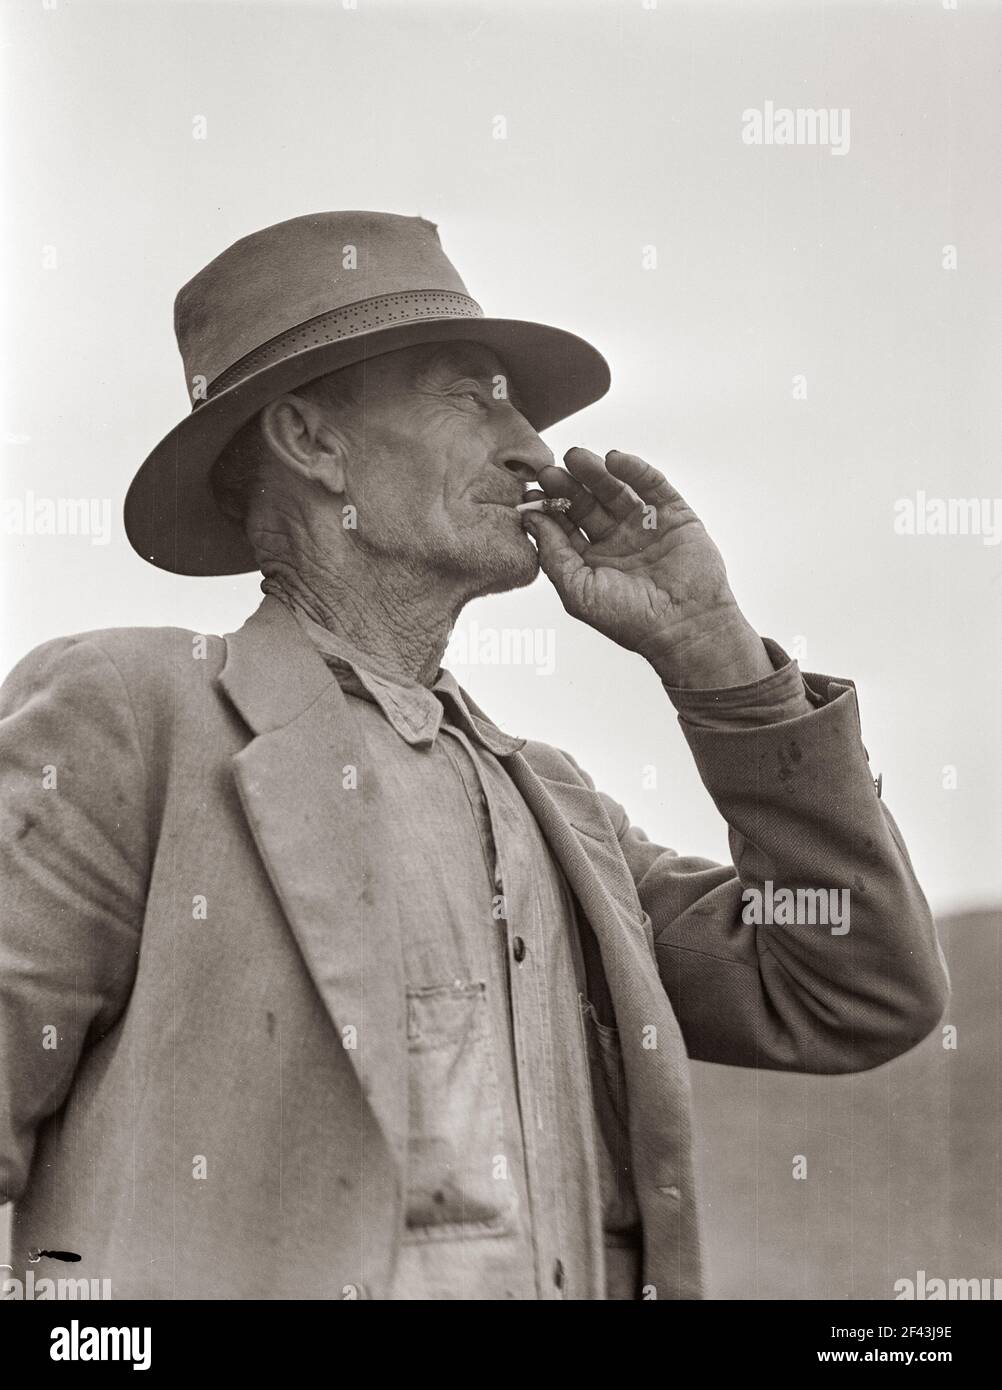 This man is a labor contractor in the pea fields of California. 'One-Eye' Charlie gives his views. 'I'm making my living off of these people (migrant laborers) so I know the conditions.' San Luis Obispo County, California. February 1936. Photograph by Dorothea Lange. Stock Photo